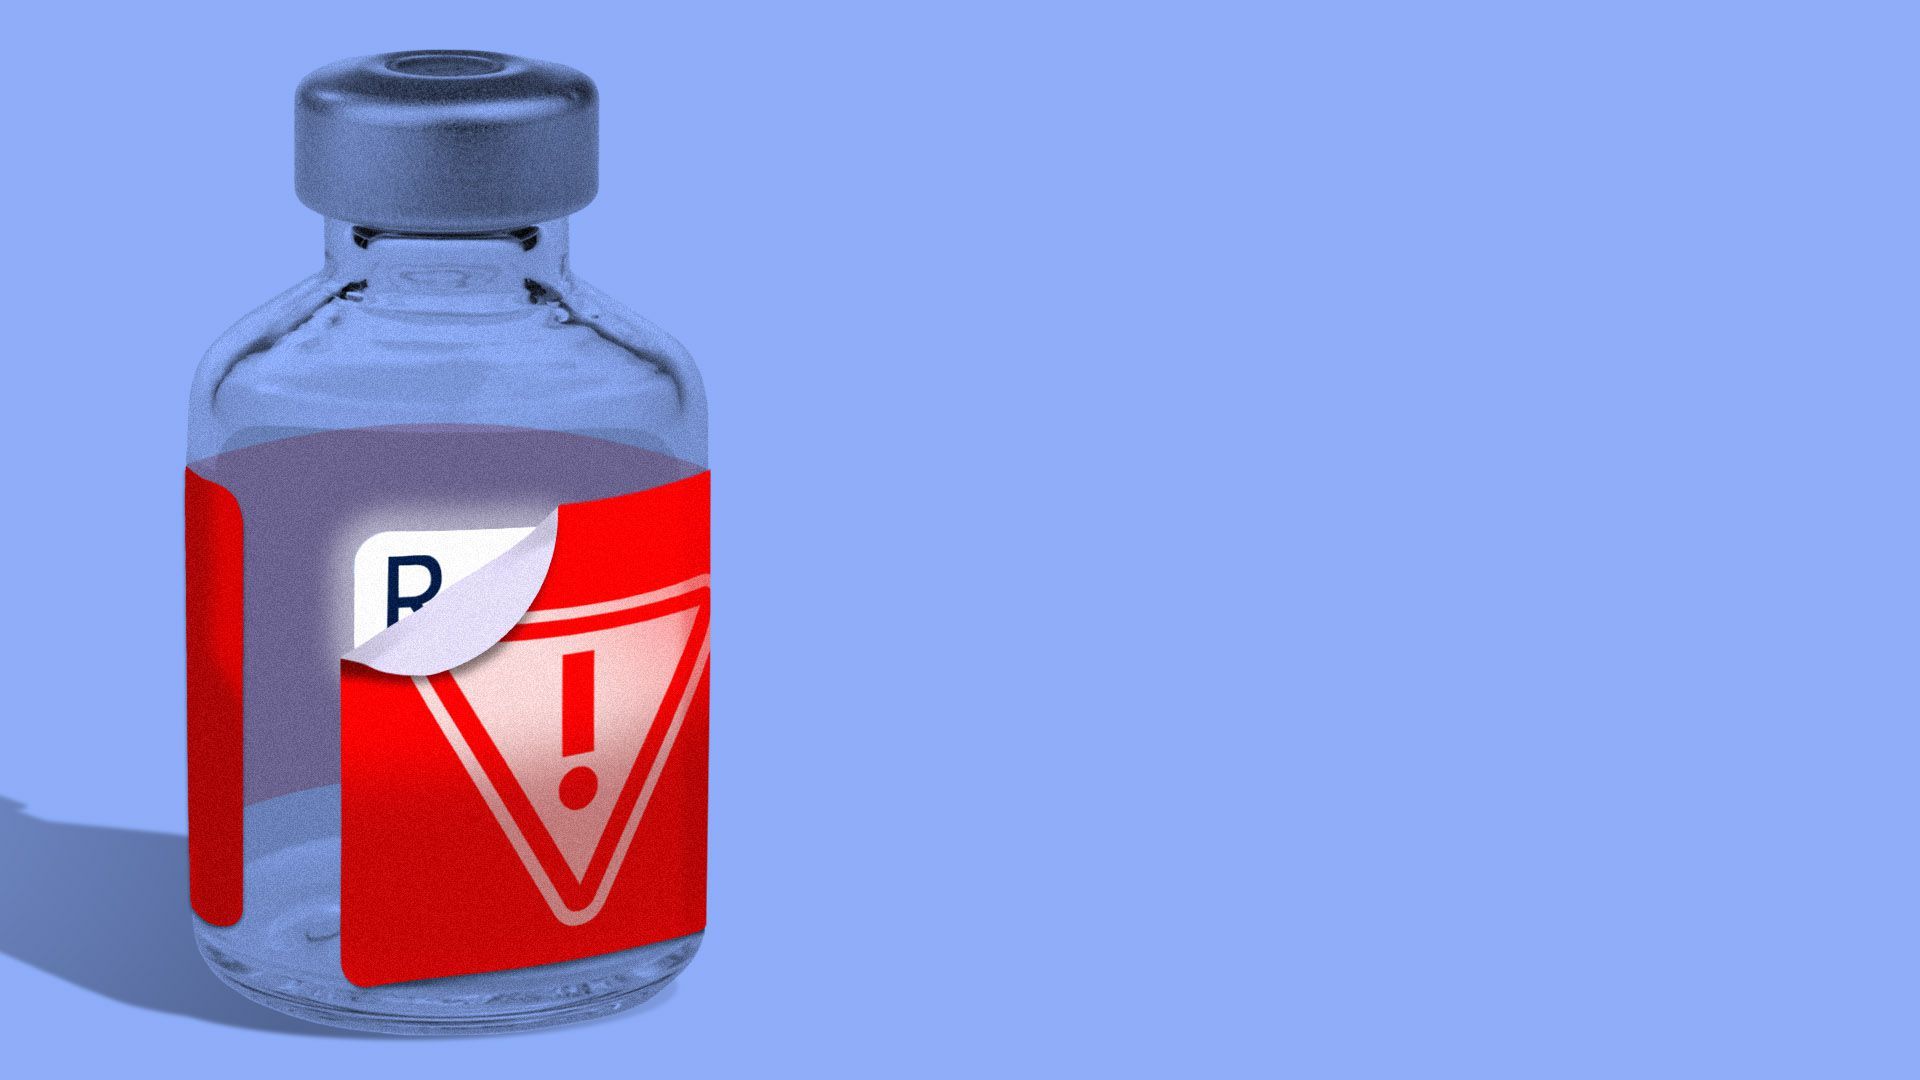 Illustration of a vaccine vial with a warning label starting to peal off